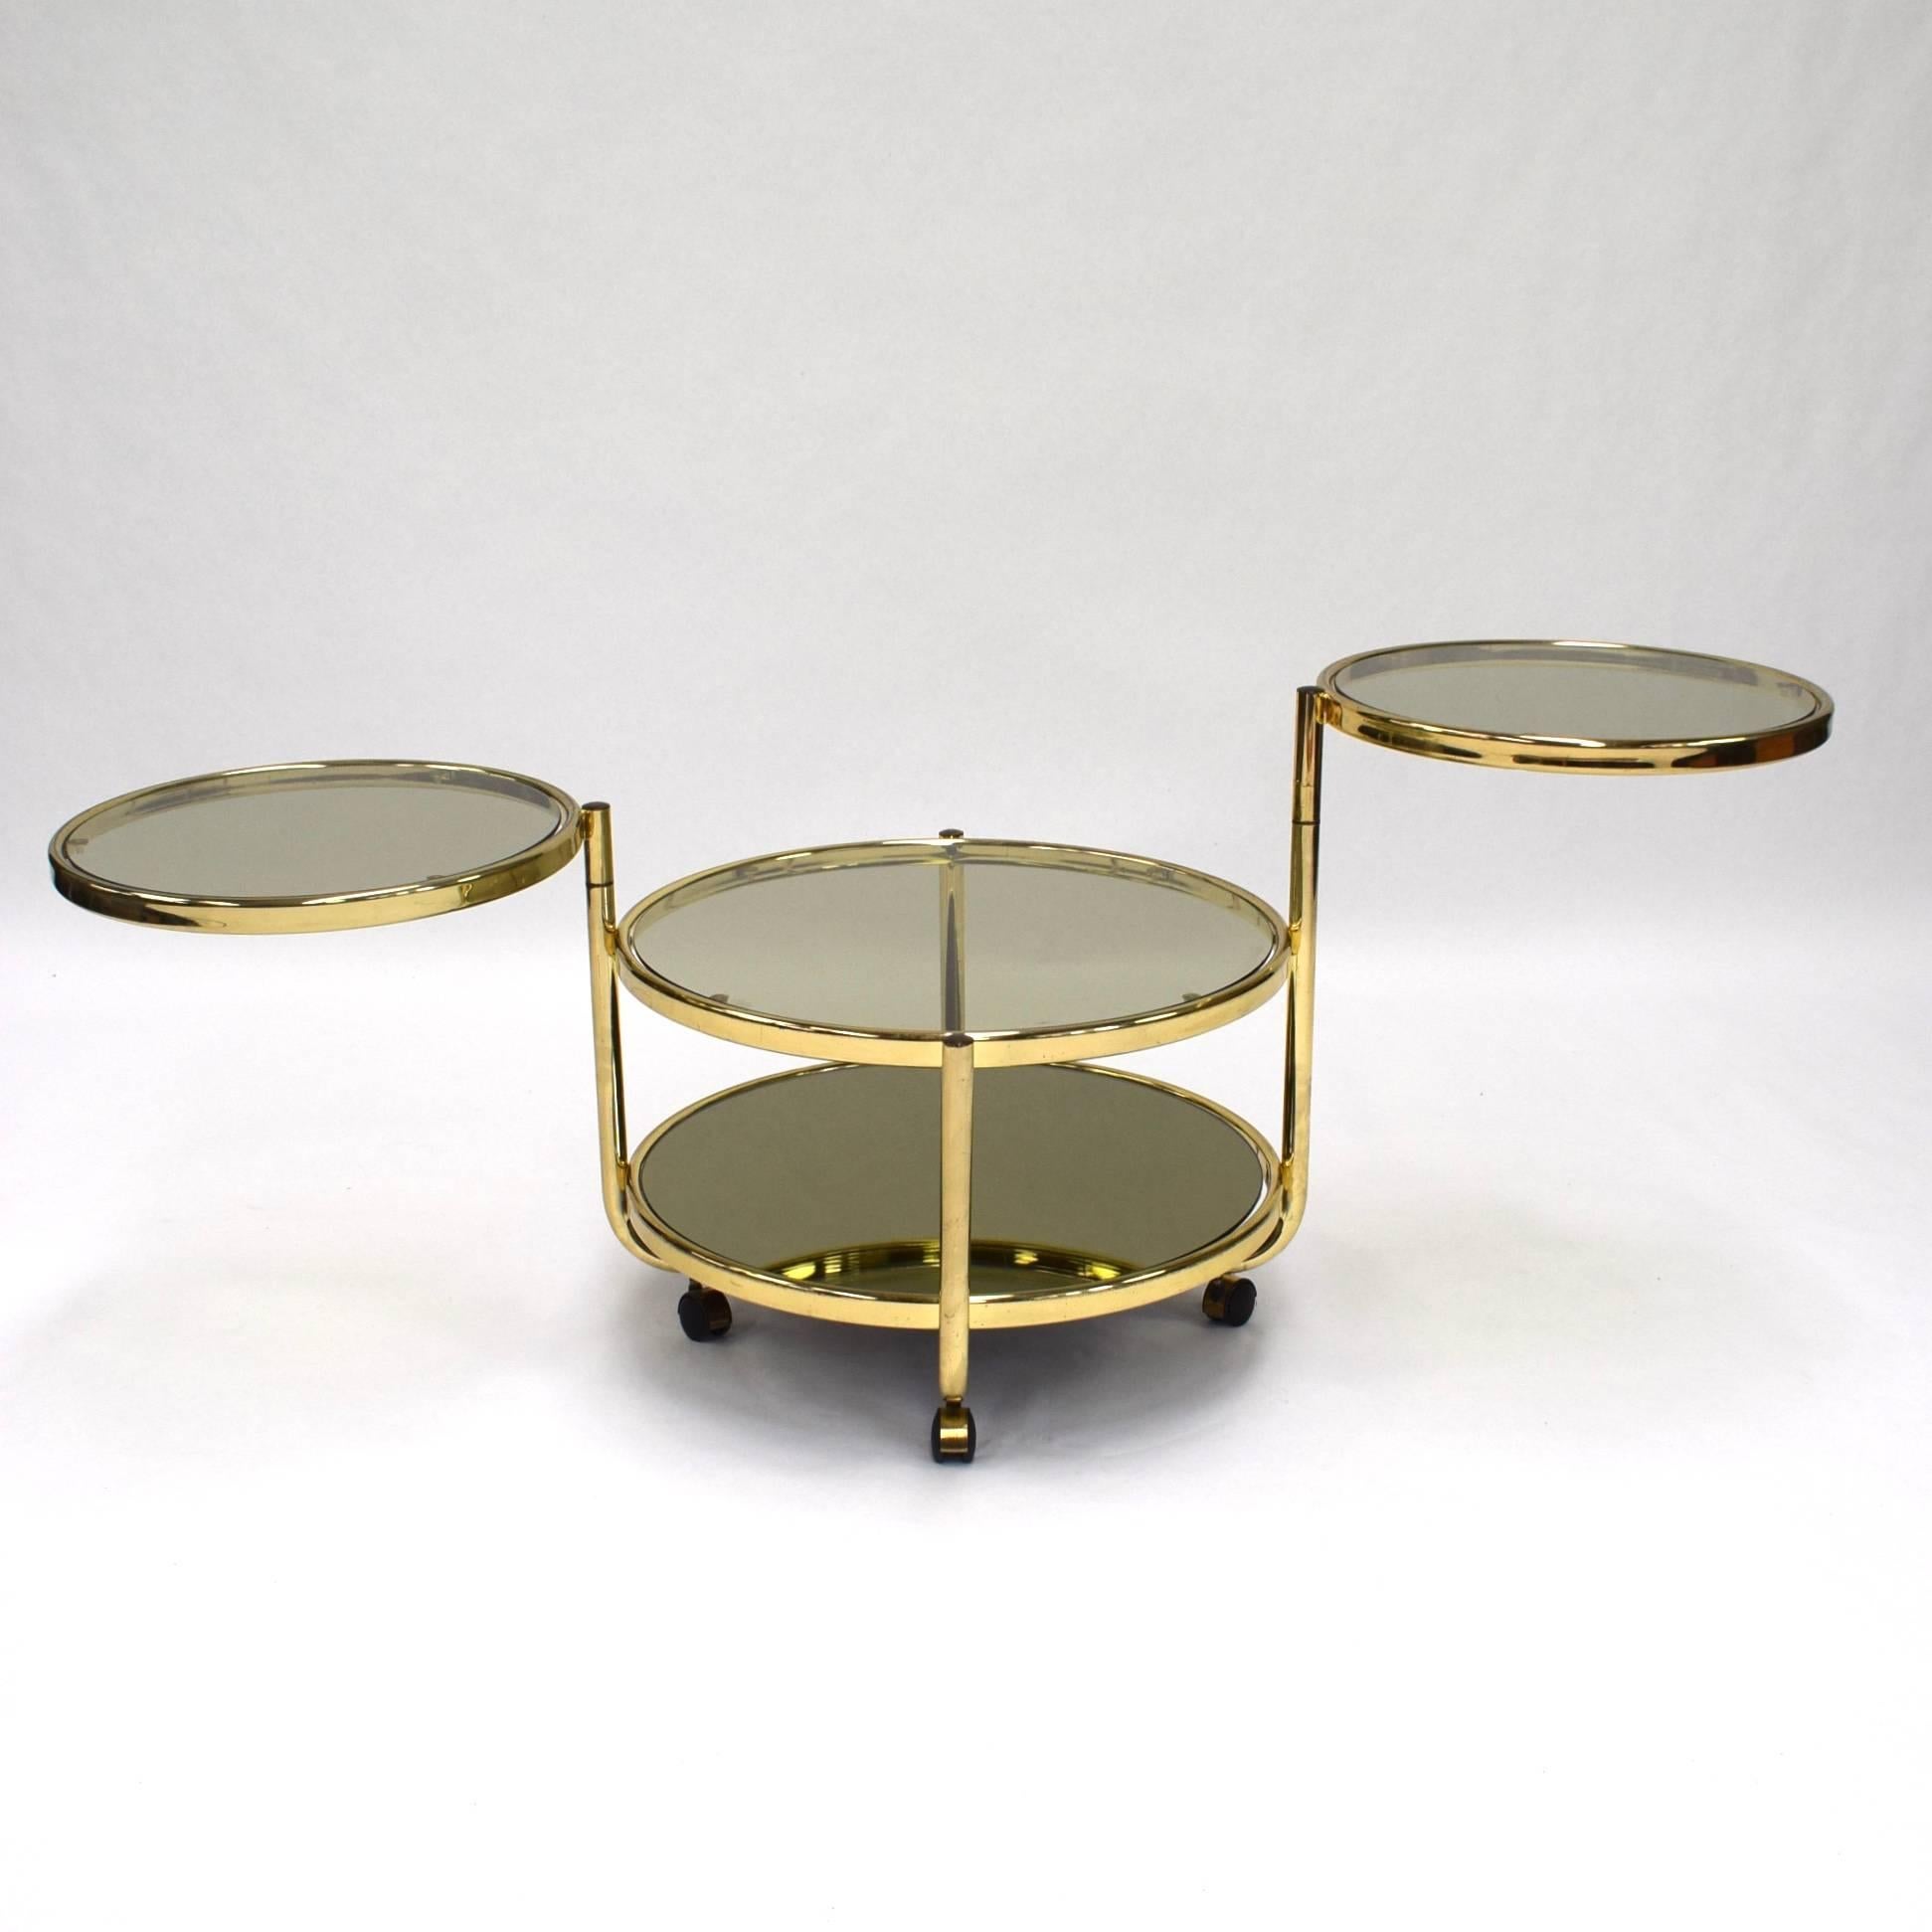 Late 20th Century Italian Round Brass and Glass Cocktail Bar Cart in Hollywood Regency Style